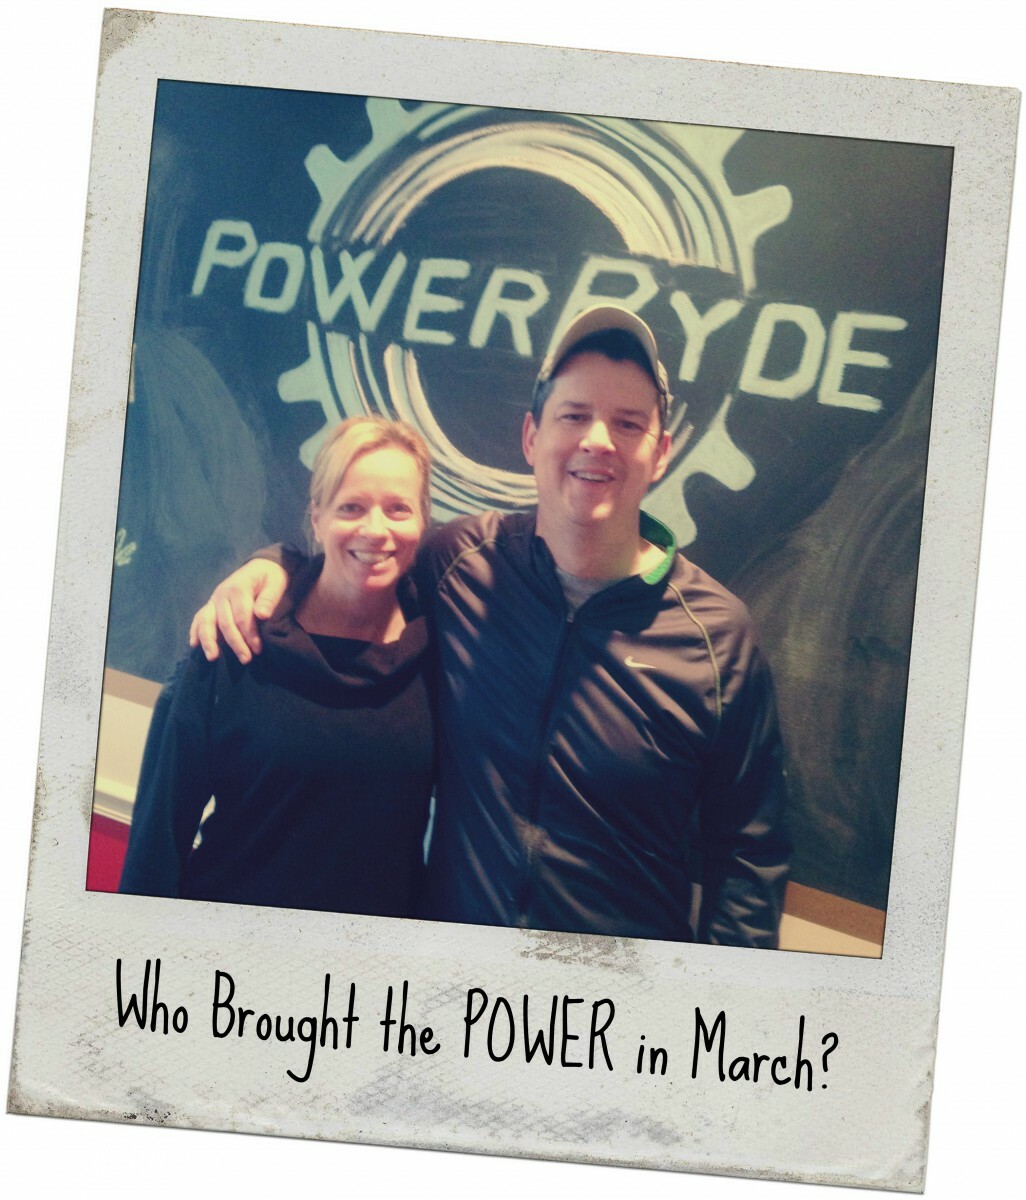 Polaroid style picture of Kim Emery with 'Who Brought the POWER in 'March'?